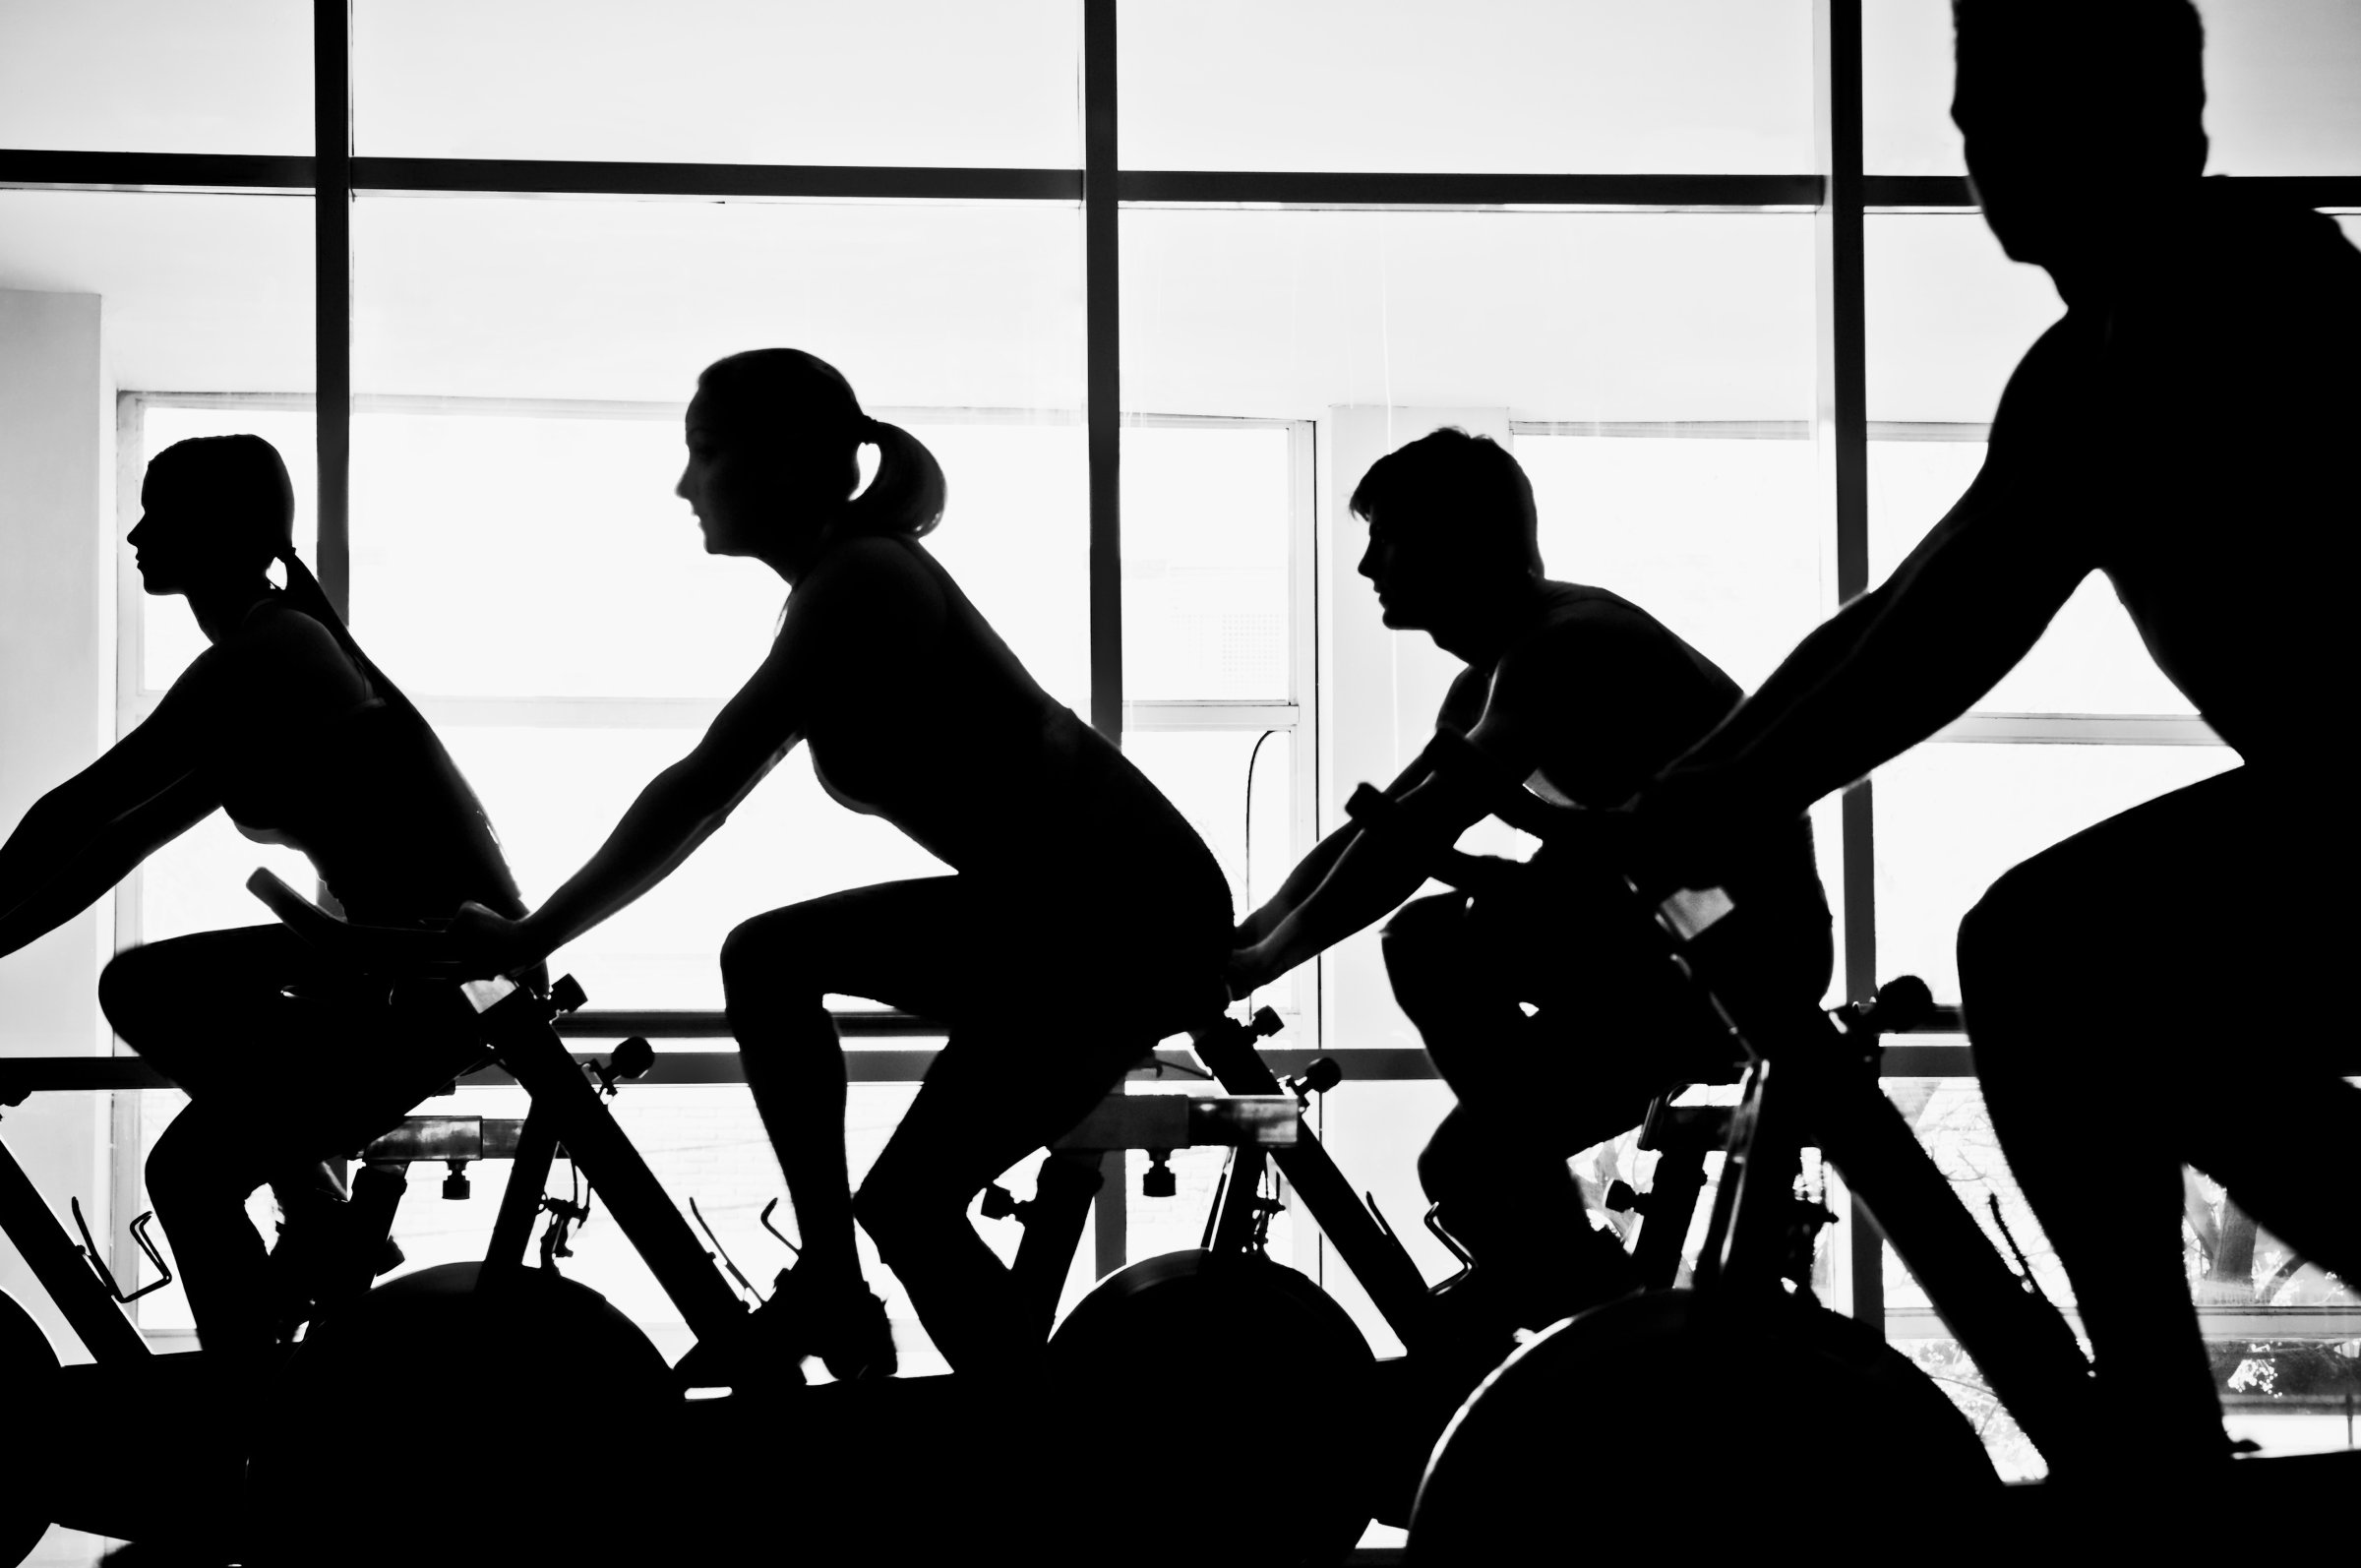 Silhouette of four people working out on exercise bikes in a gym